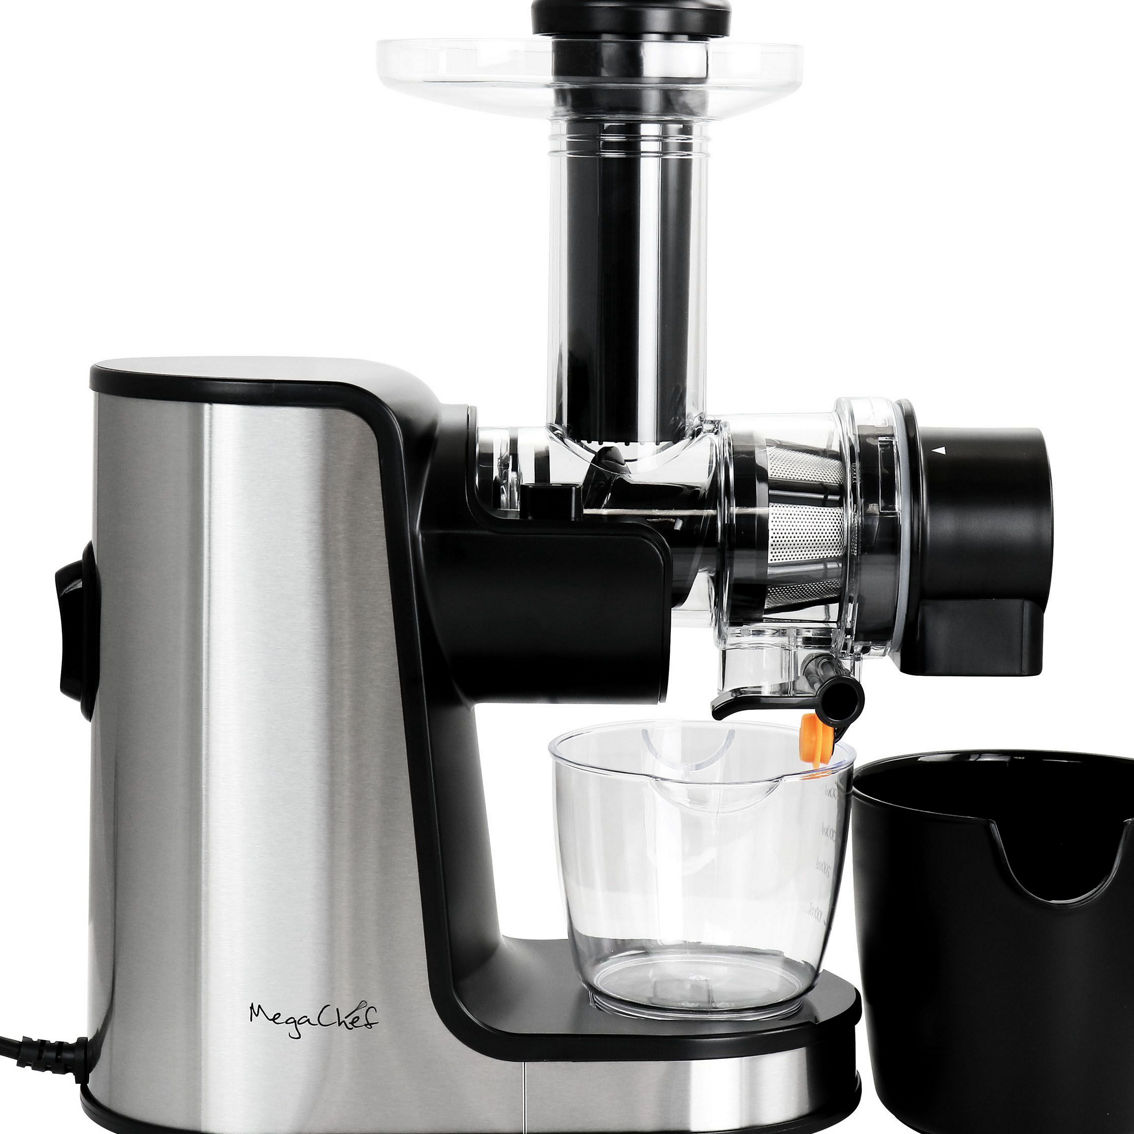 MegaChef Masticating Slow Juicer Extractor with Reverse Function, Cold Press Jui - Image 3 of 5